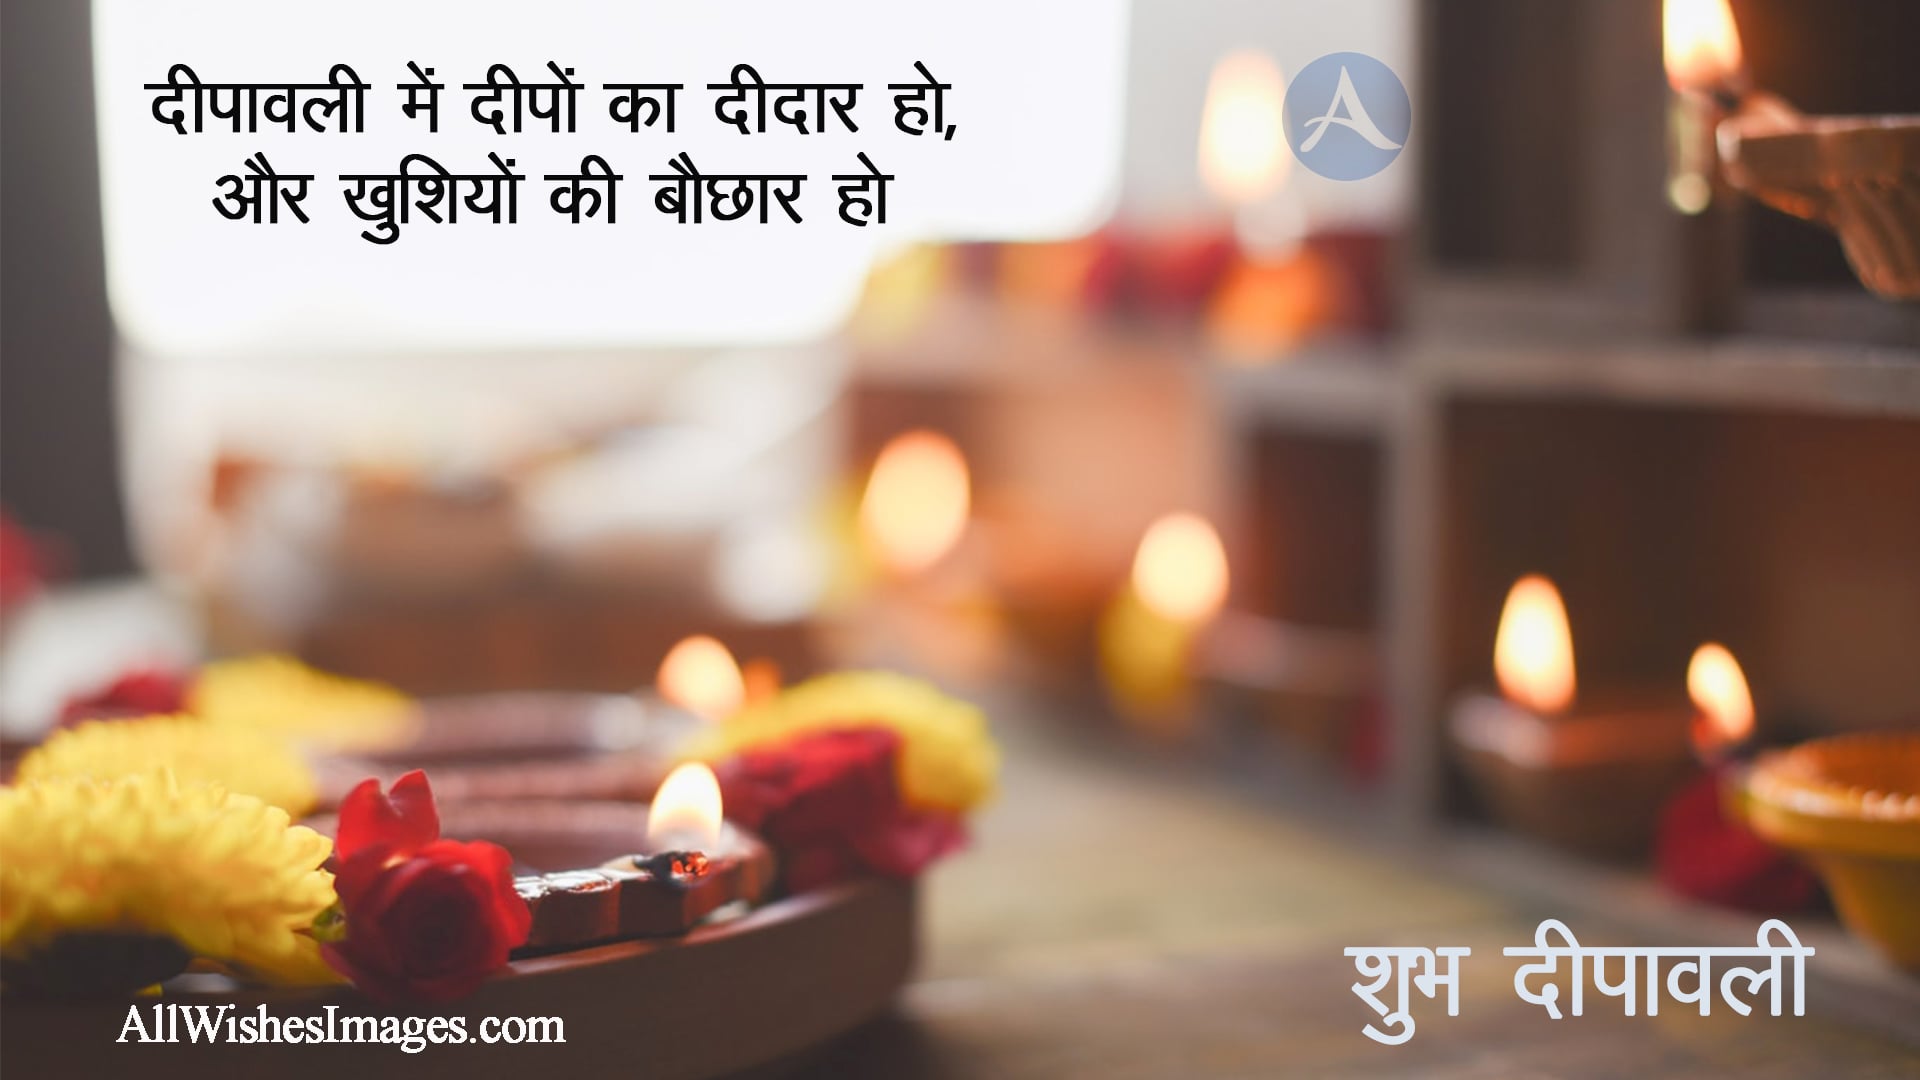 Wishing a Happy Diwali Images HD Hindi - All Wishes Images - Images for  WhatsApp